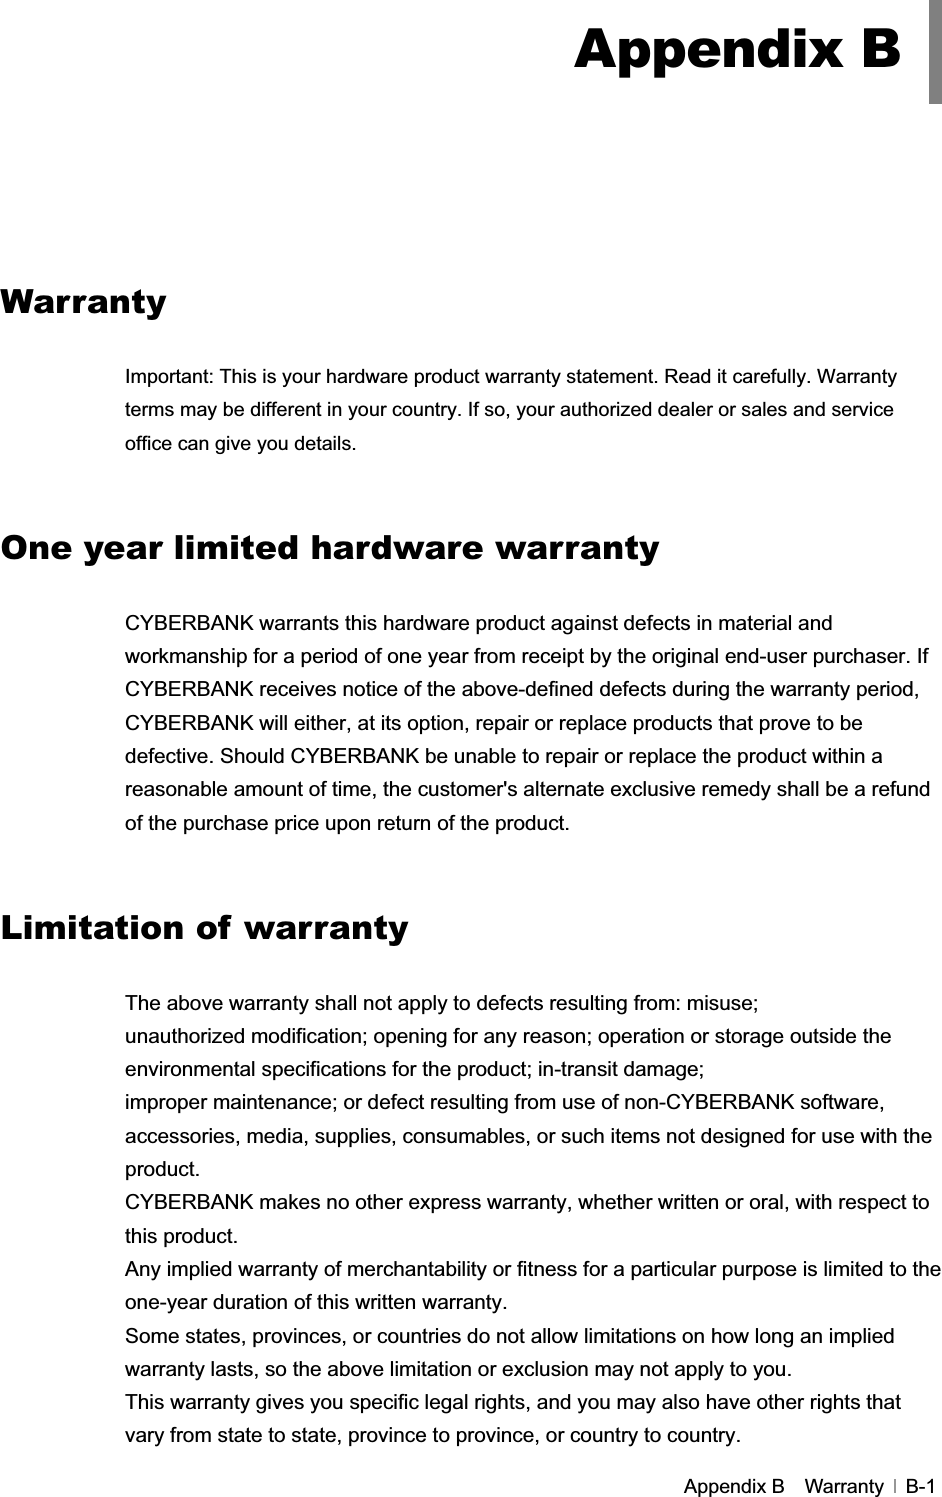 GAppendix B    Warranty   B-1GGGGGGGGGWarranty GImportant: This is your hardware product warranty statement. Read it carefully. Warranty terms may be different in your country. If so, your authorized dealer or sales and service office can give you details. One year limited hardware warrantyCYBERBANK warrants this hardware product against defects in material and workmanship for a period of one year from receipt by the original end-user purchaser. If CYBERBANK receives notice of the above-defined defects during the warranty period, CYBERBANK will either, at its option, repair or replace products that prove to be defective. Should CYBERBANK be unable to repair or replace the product within a reasonable amount of time, the customer&apos;s alternate exclusive remedy shall be a refund of the purchase price upon return of the product. Limitation of warranty The above warranty shall not apply to defects resulting from: misuse; unauthorized modification; opening for any reason; operation or storage outside the environmental specifications for the product; in-transit damage; improper maintenance; or defect resulting from use of non-CYBERBANK software, accessories, media, supplies, consumables, or such items not designed for use with the product. CYBERBANK makes no other express warranty, whether written or oral, with respect to this product. Any implied warranty of merchantability or fitness for a particular purpose is limited to the one-year duration of this written warranty. Some states, provinces, or countries do not allow limitations on how long an implied warranty lasts, so the above limitation or exclusion may not apply to you. This warranty gives you specific legal rights, and you may also have other rights that vary from state to state, province to province, or country to country.   Appendix B